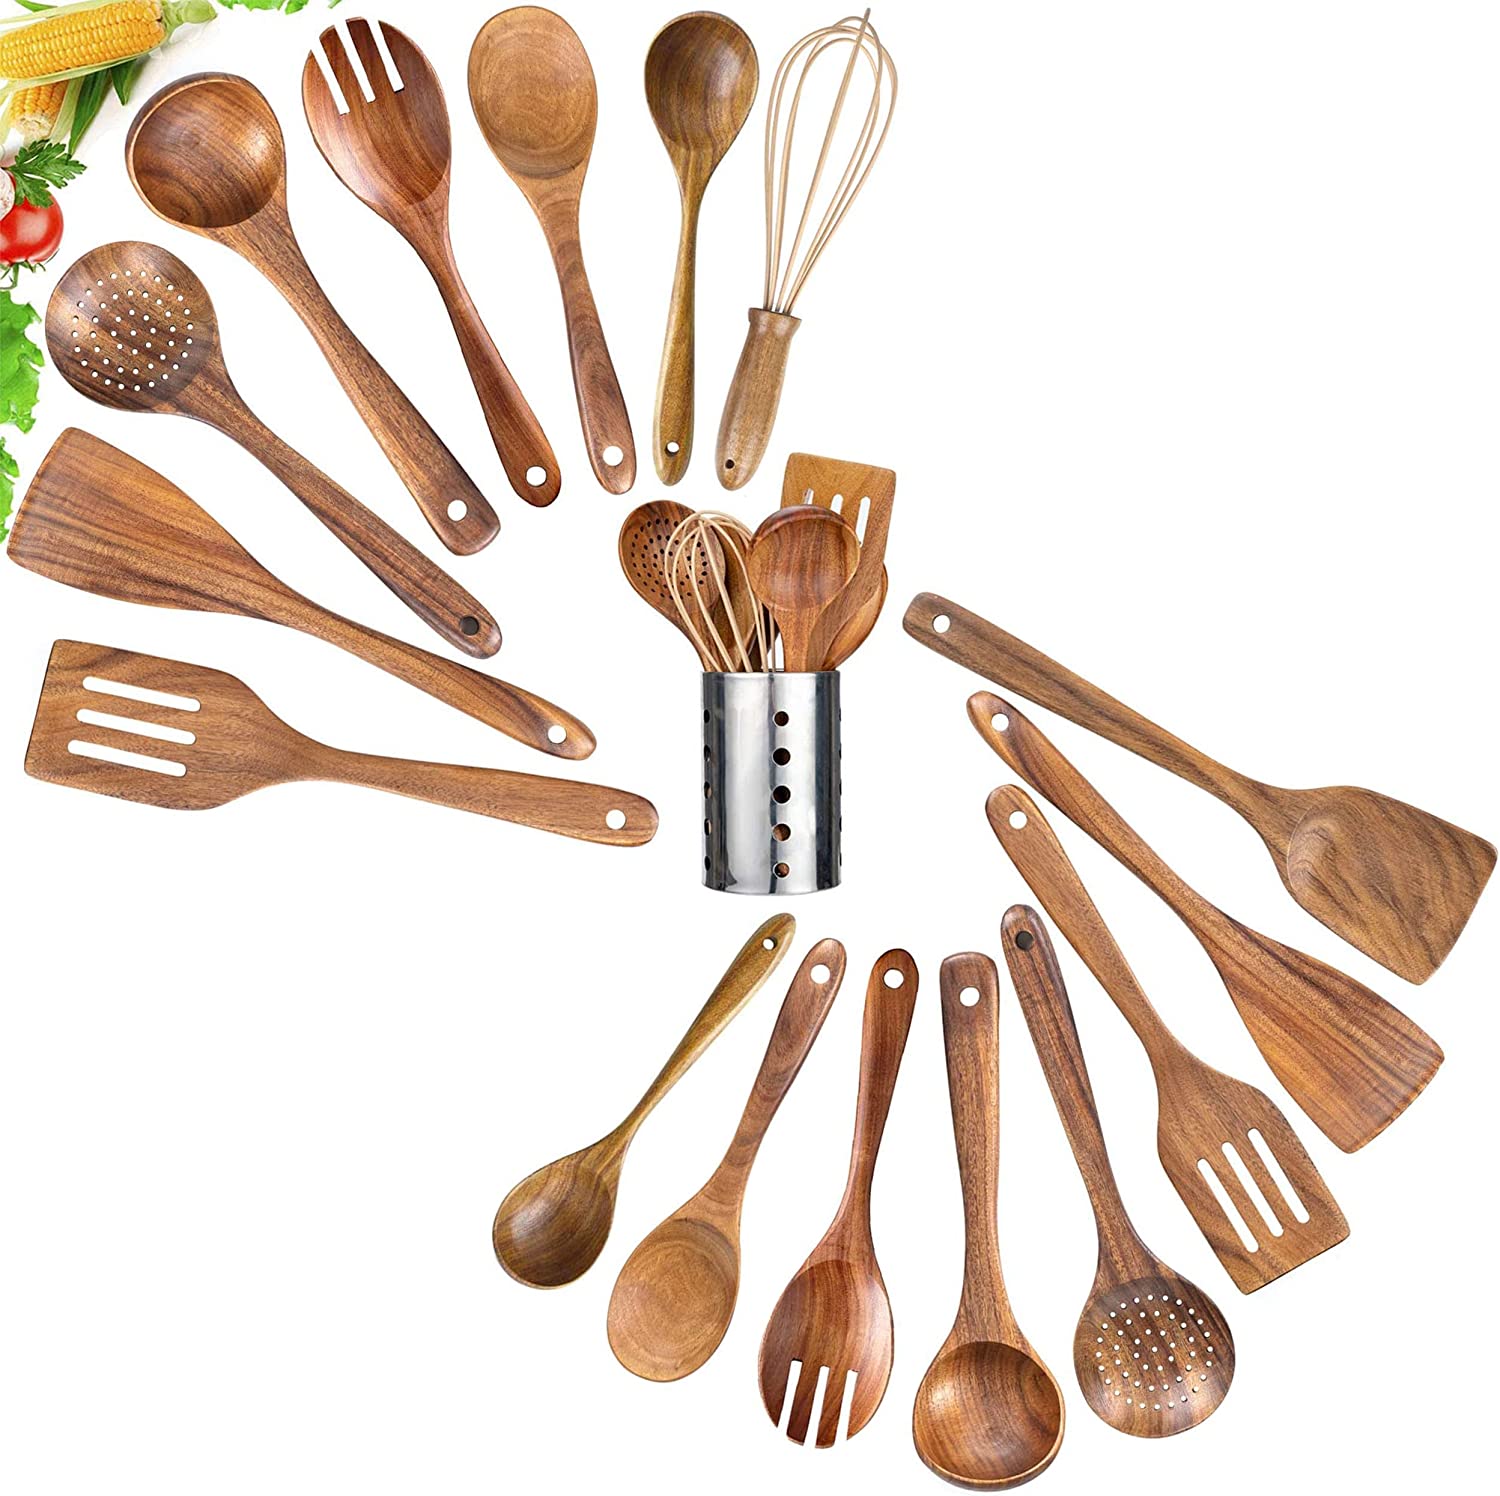 17 Pack Wooden Spoons with Holder Wood Kitchen Utensil Set for Cooking Nonstick Kitchen